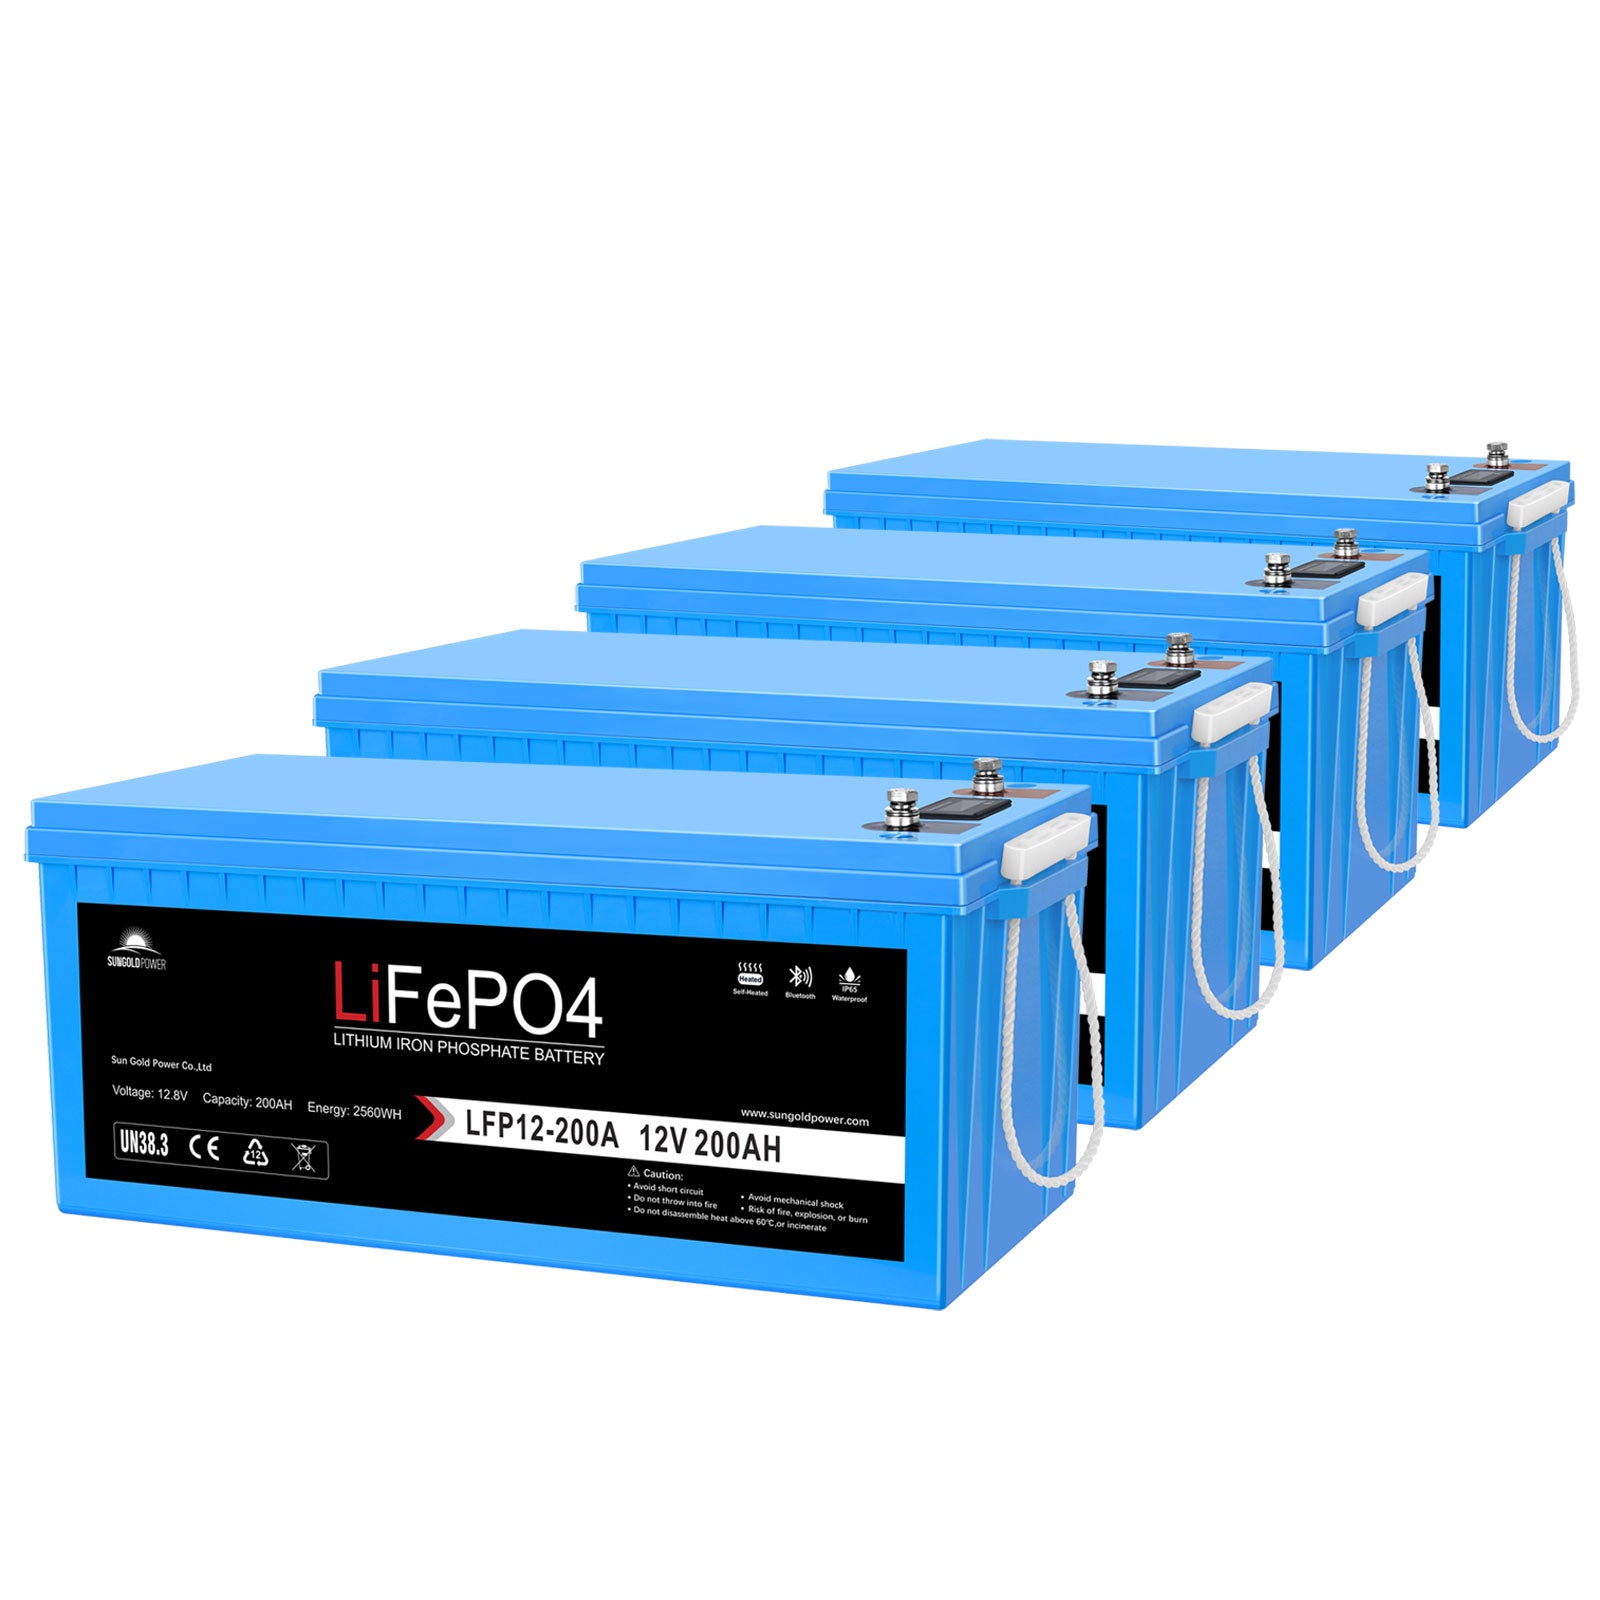 Lithium 12V 200Ah LiFePO4 Battery with Bluetooth